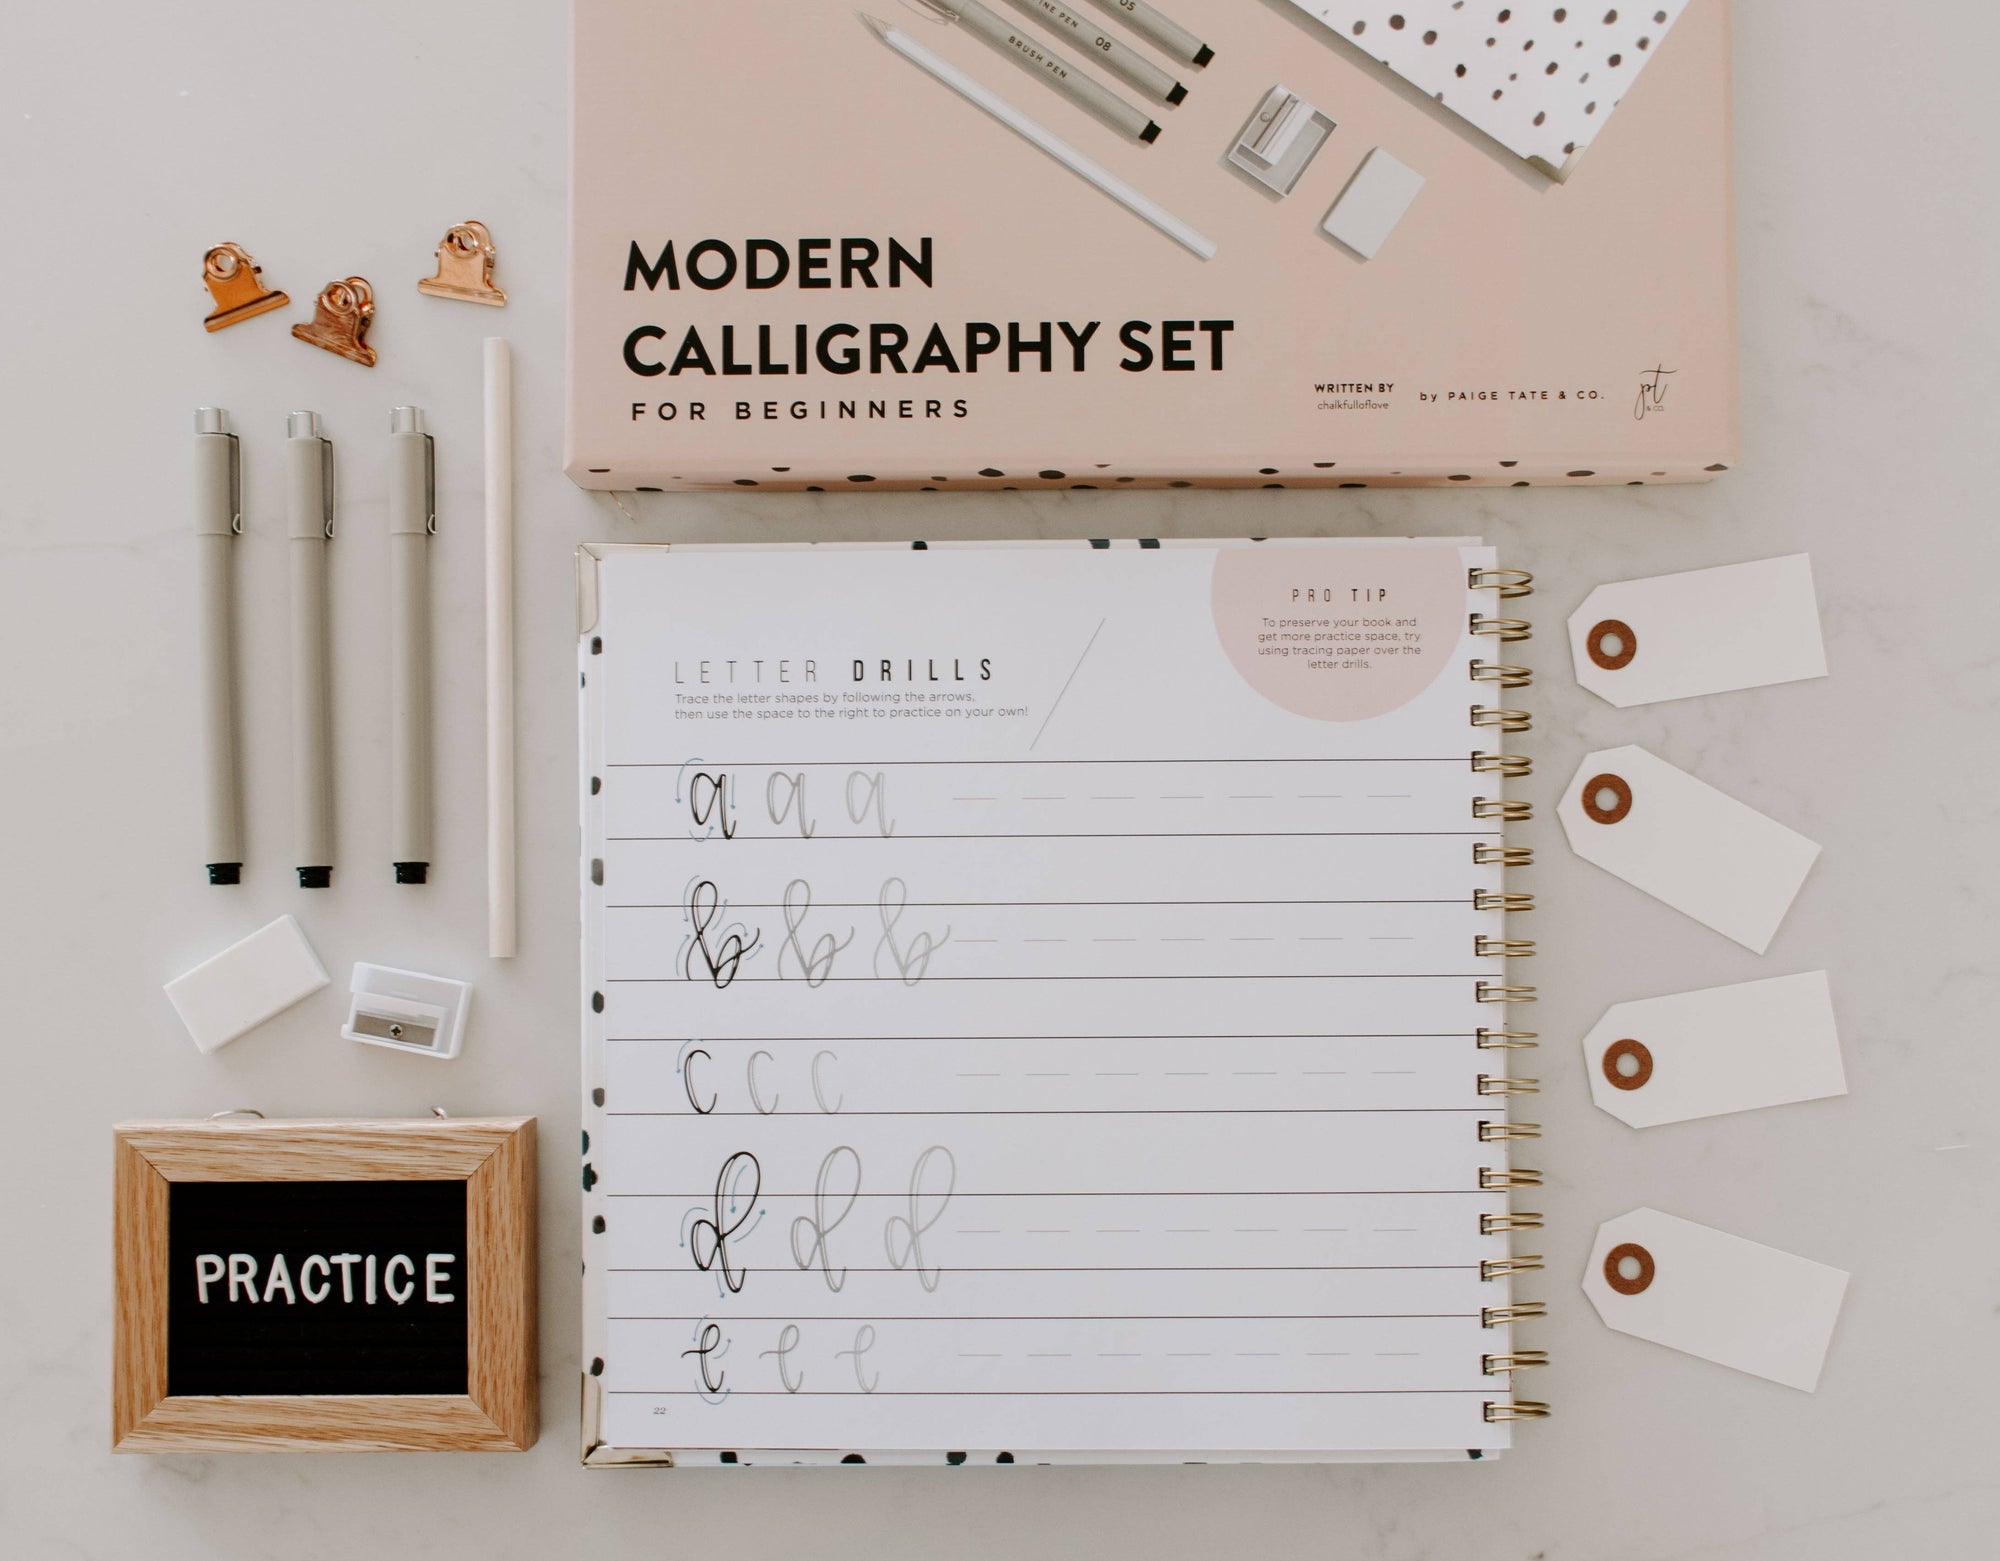 A Modern Calligraphy Set for Beginners featuring pens and pencils designed for creative lettering.